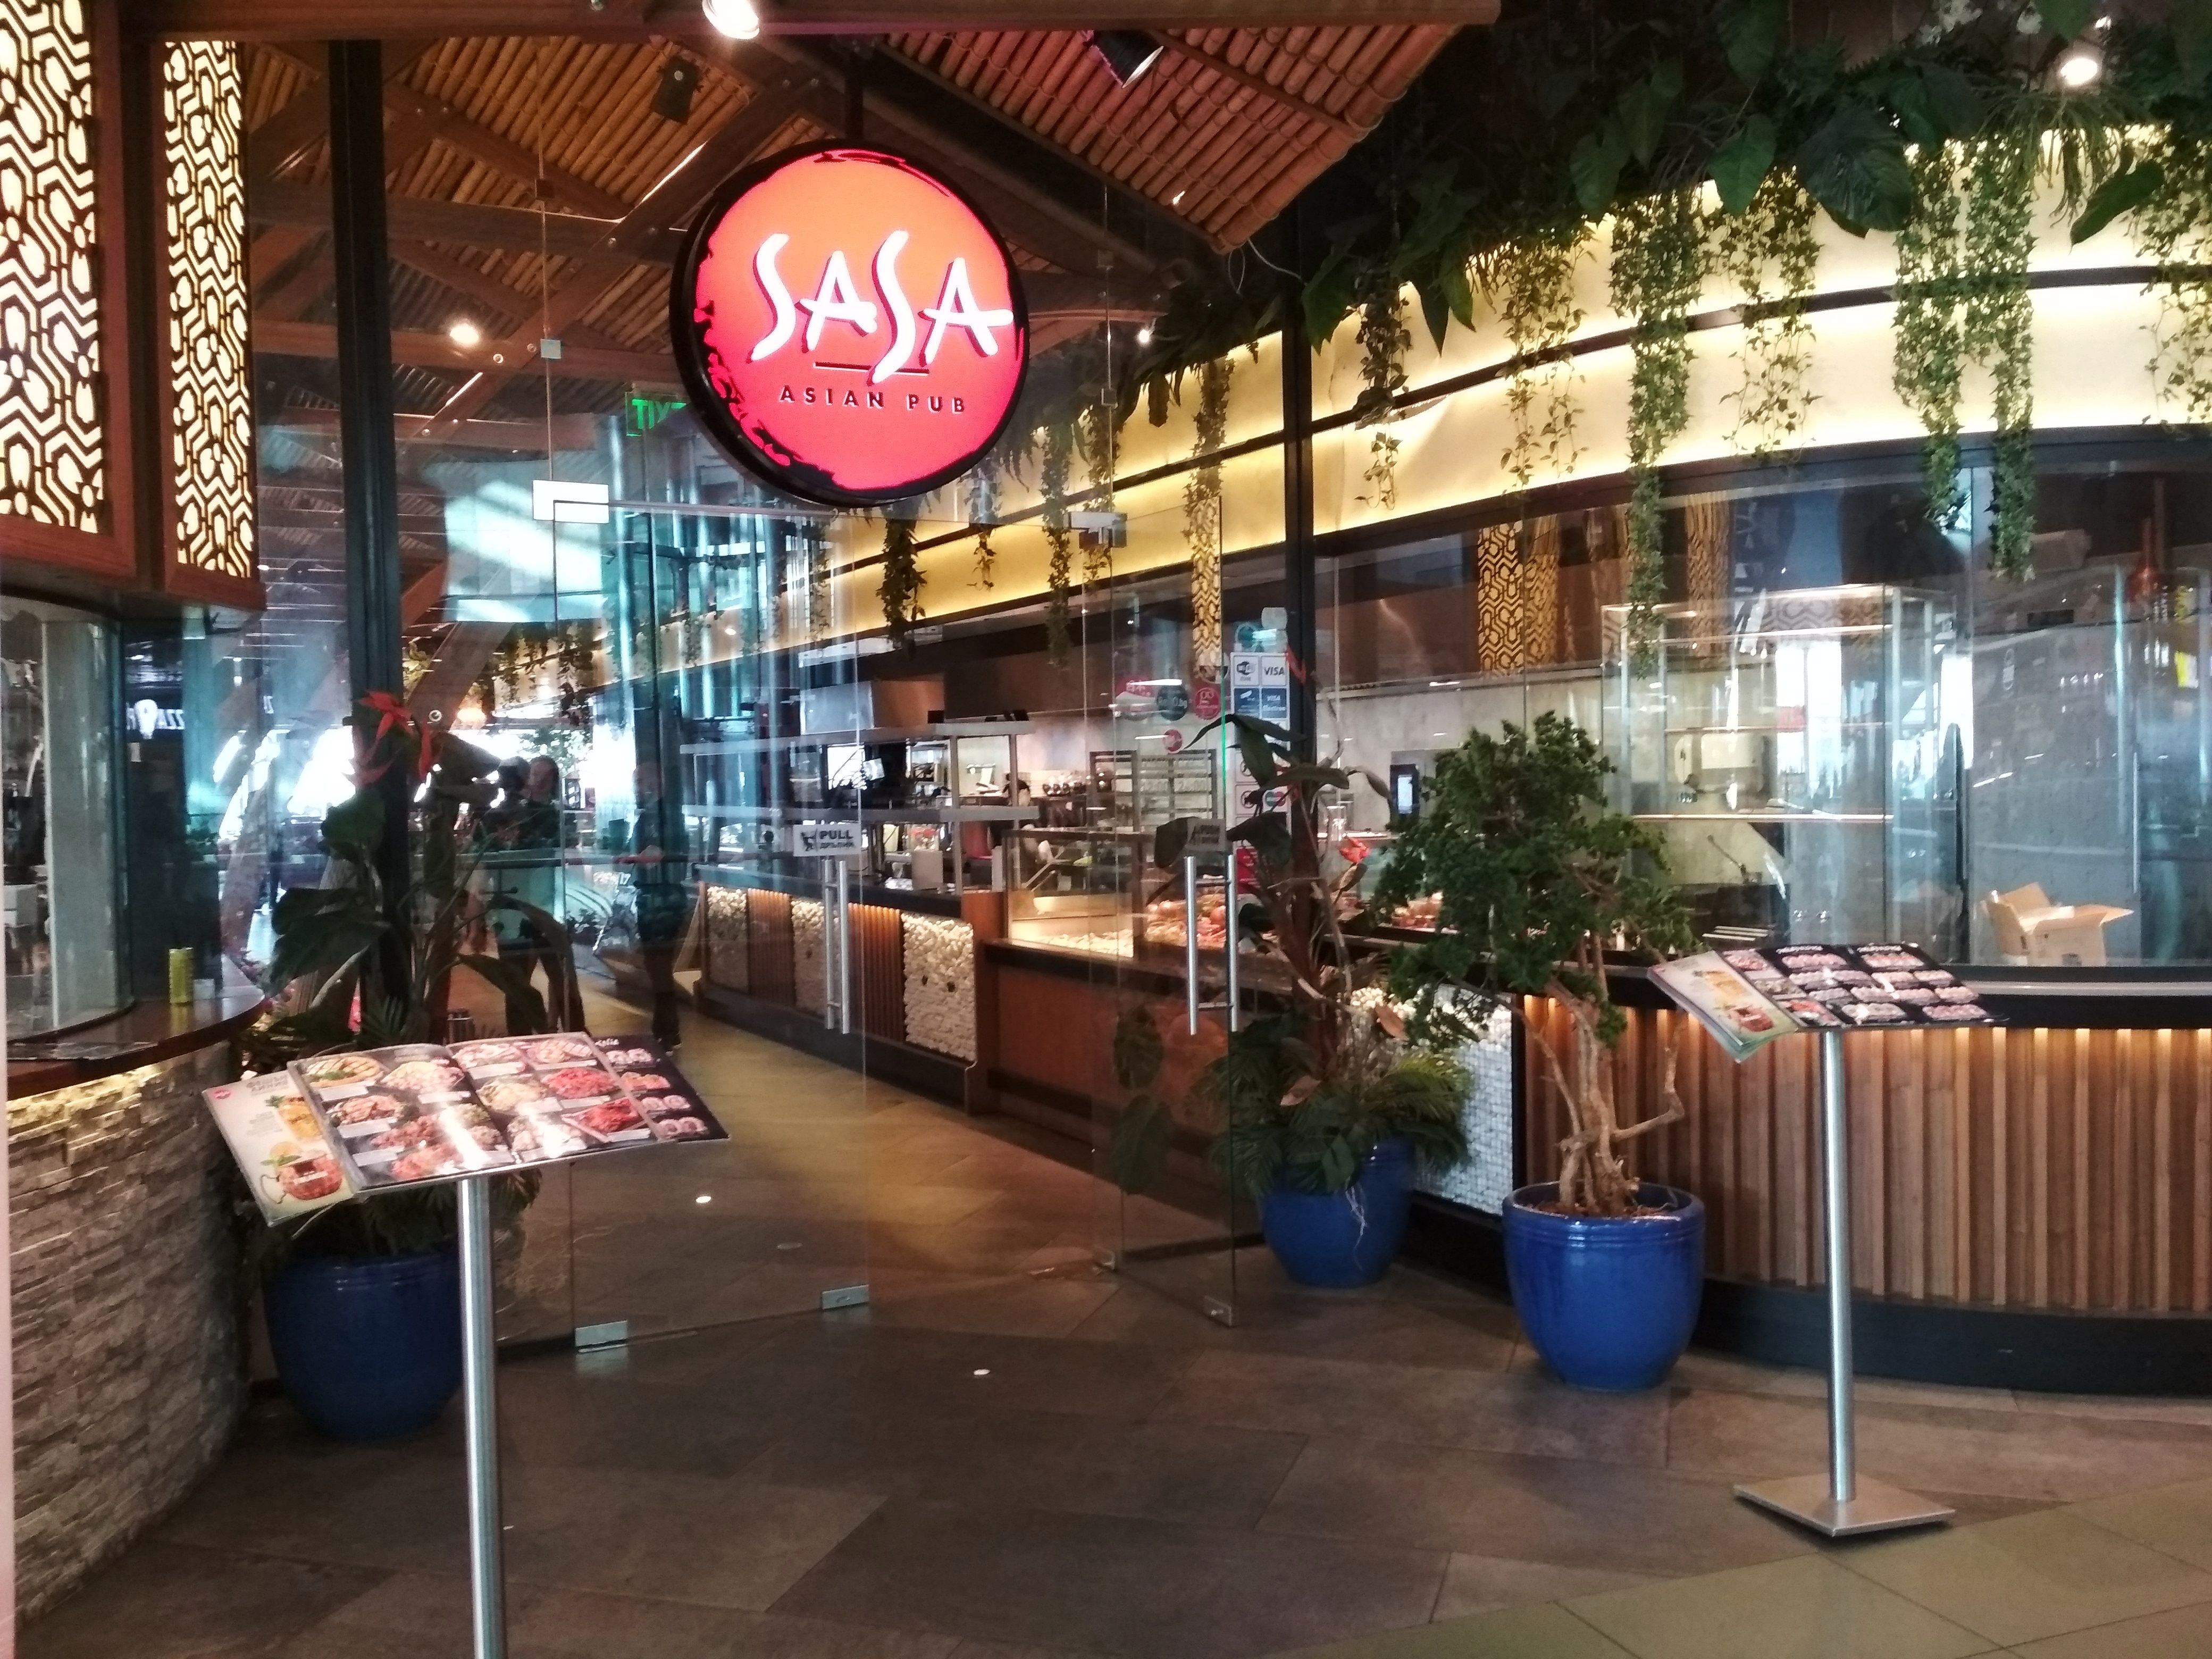 Caption: A photo of the exterior of the SASA restaurant, showing a wheelchair accessible entrance through glass doors, two stands for the menu, and a sign that says “SASA Asian Pub” in Sofia, Bulgaria. (Local Guide @DeniGu)